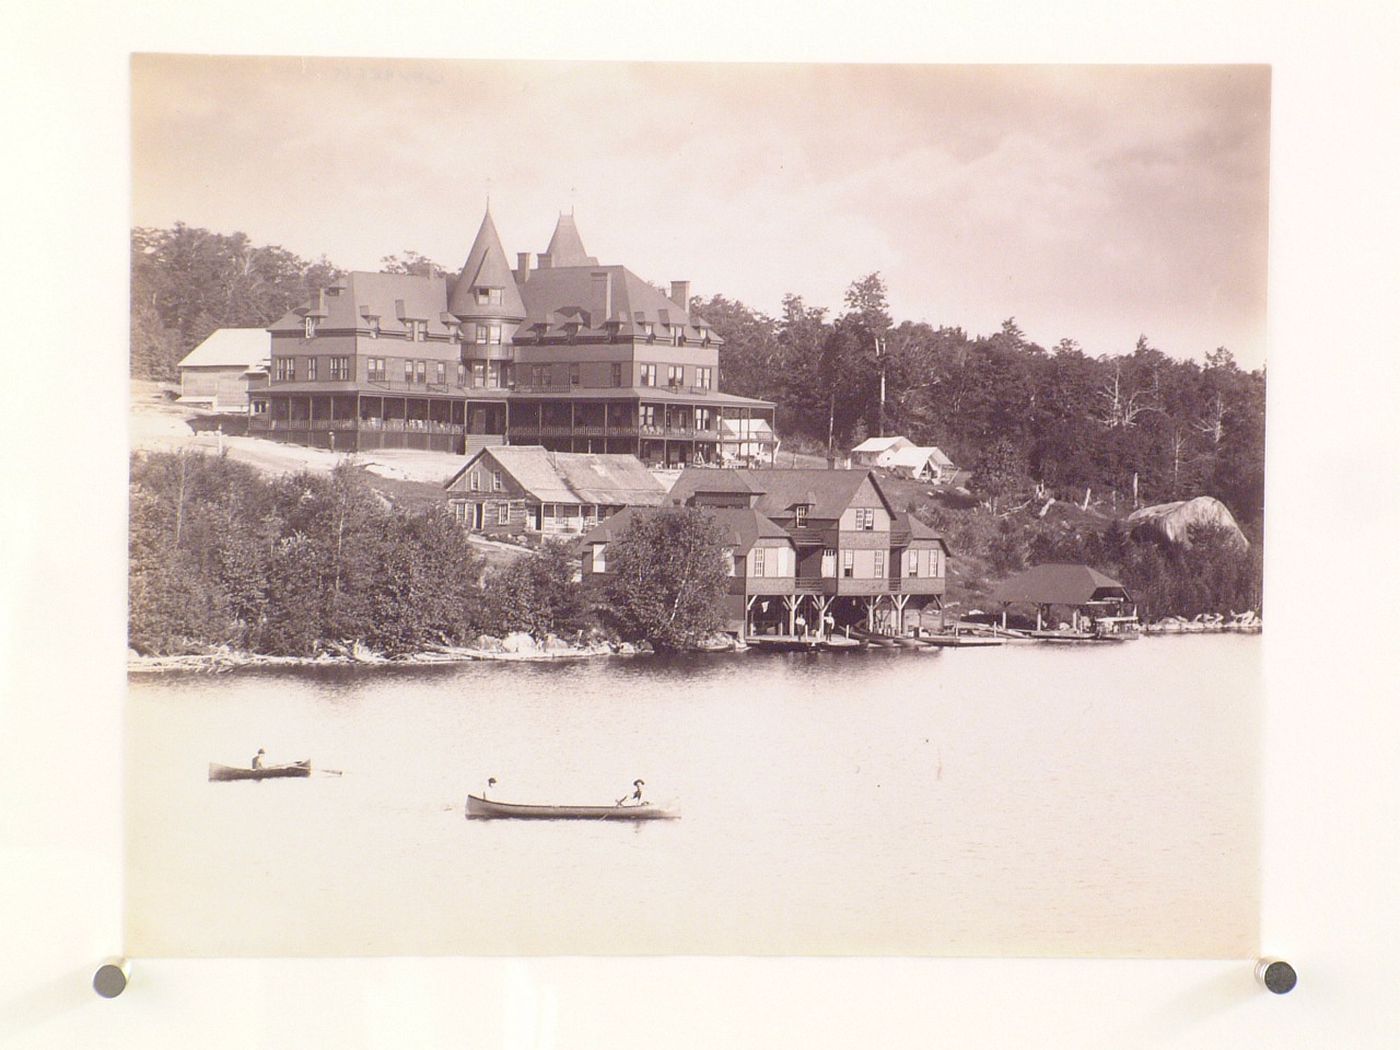 Lake, hotel, and boathouse, probably in New York State